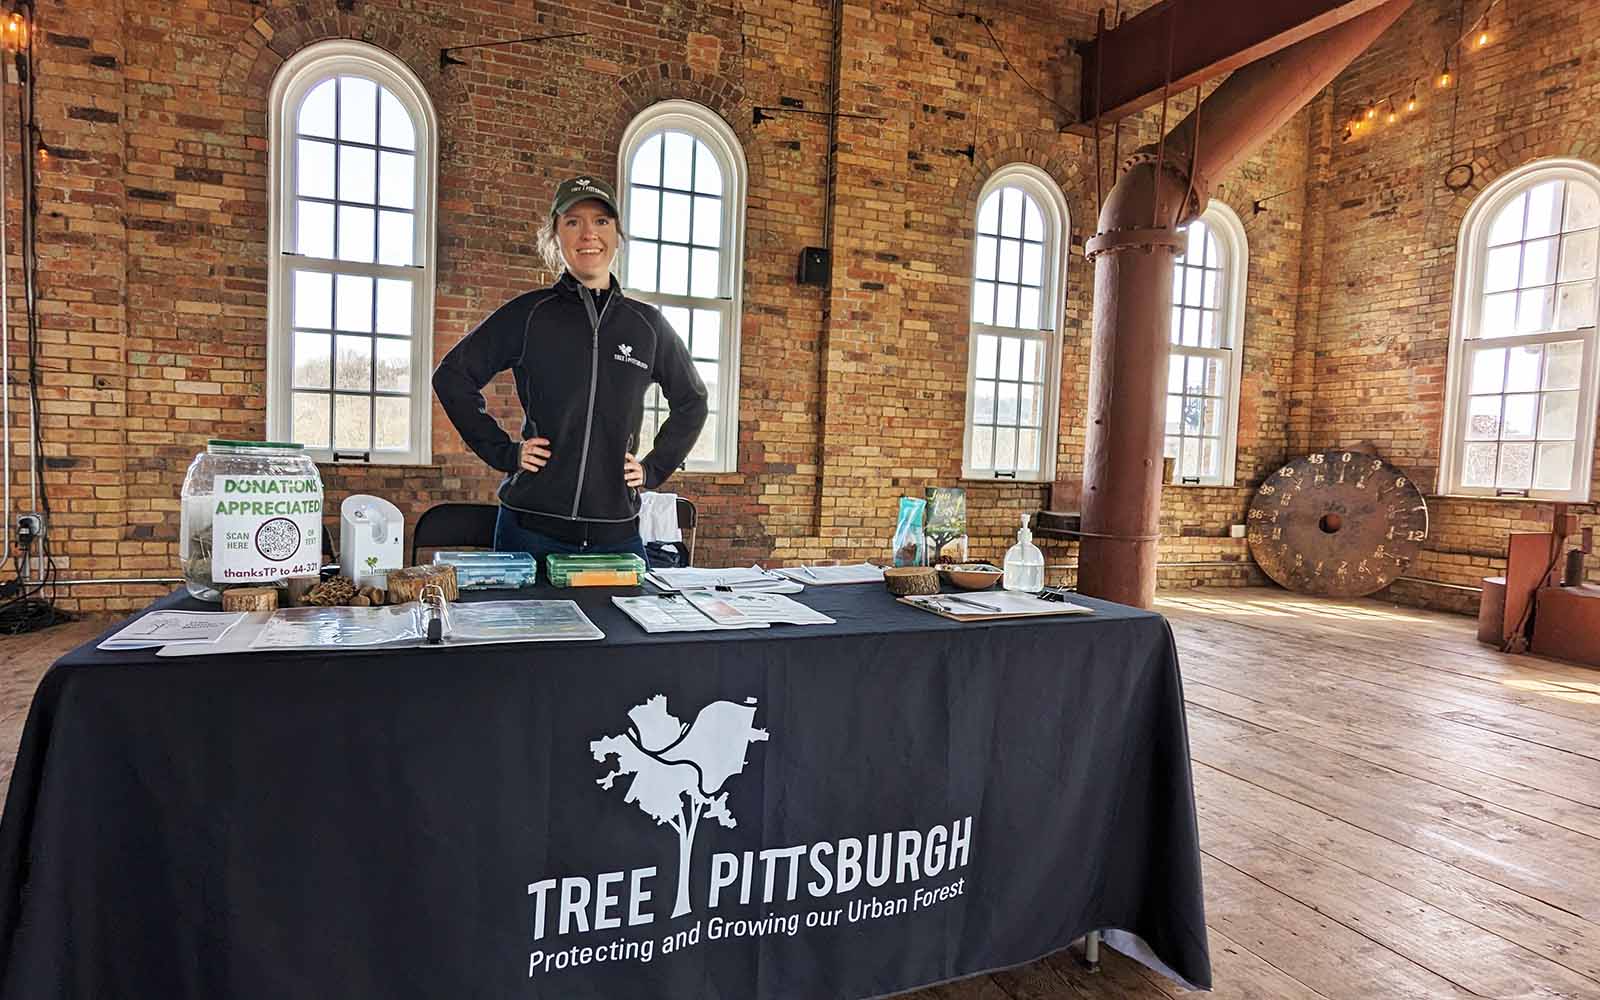 A youthful white woman stands behind a table with a Tree Pittsburgh table covering on it with her hands on her hips, ready to greet visitors with a smile.